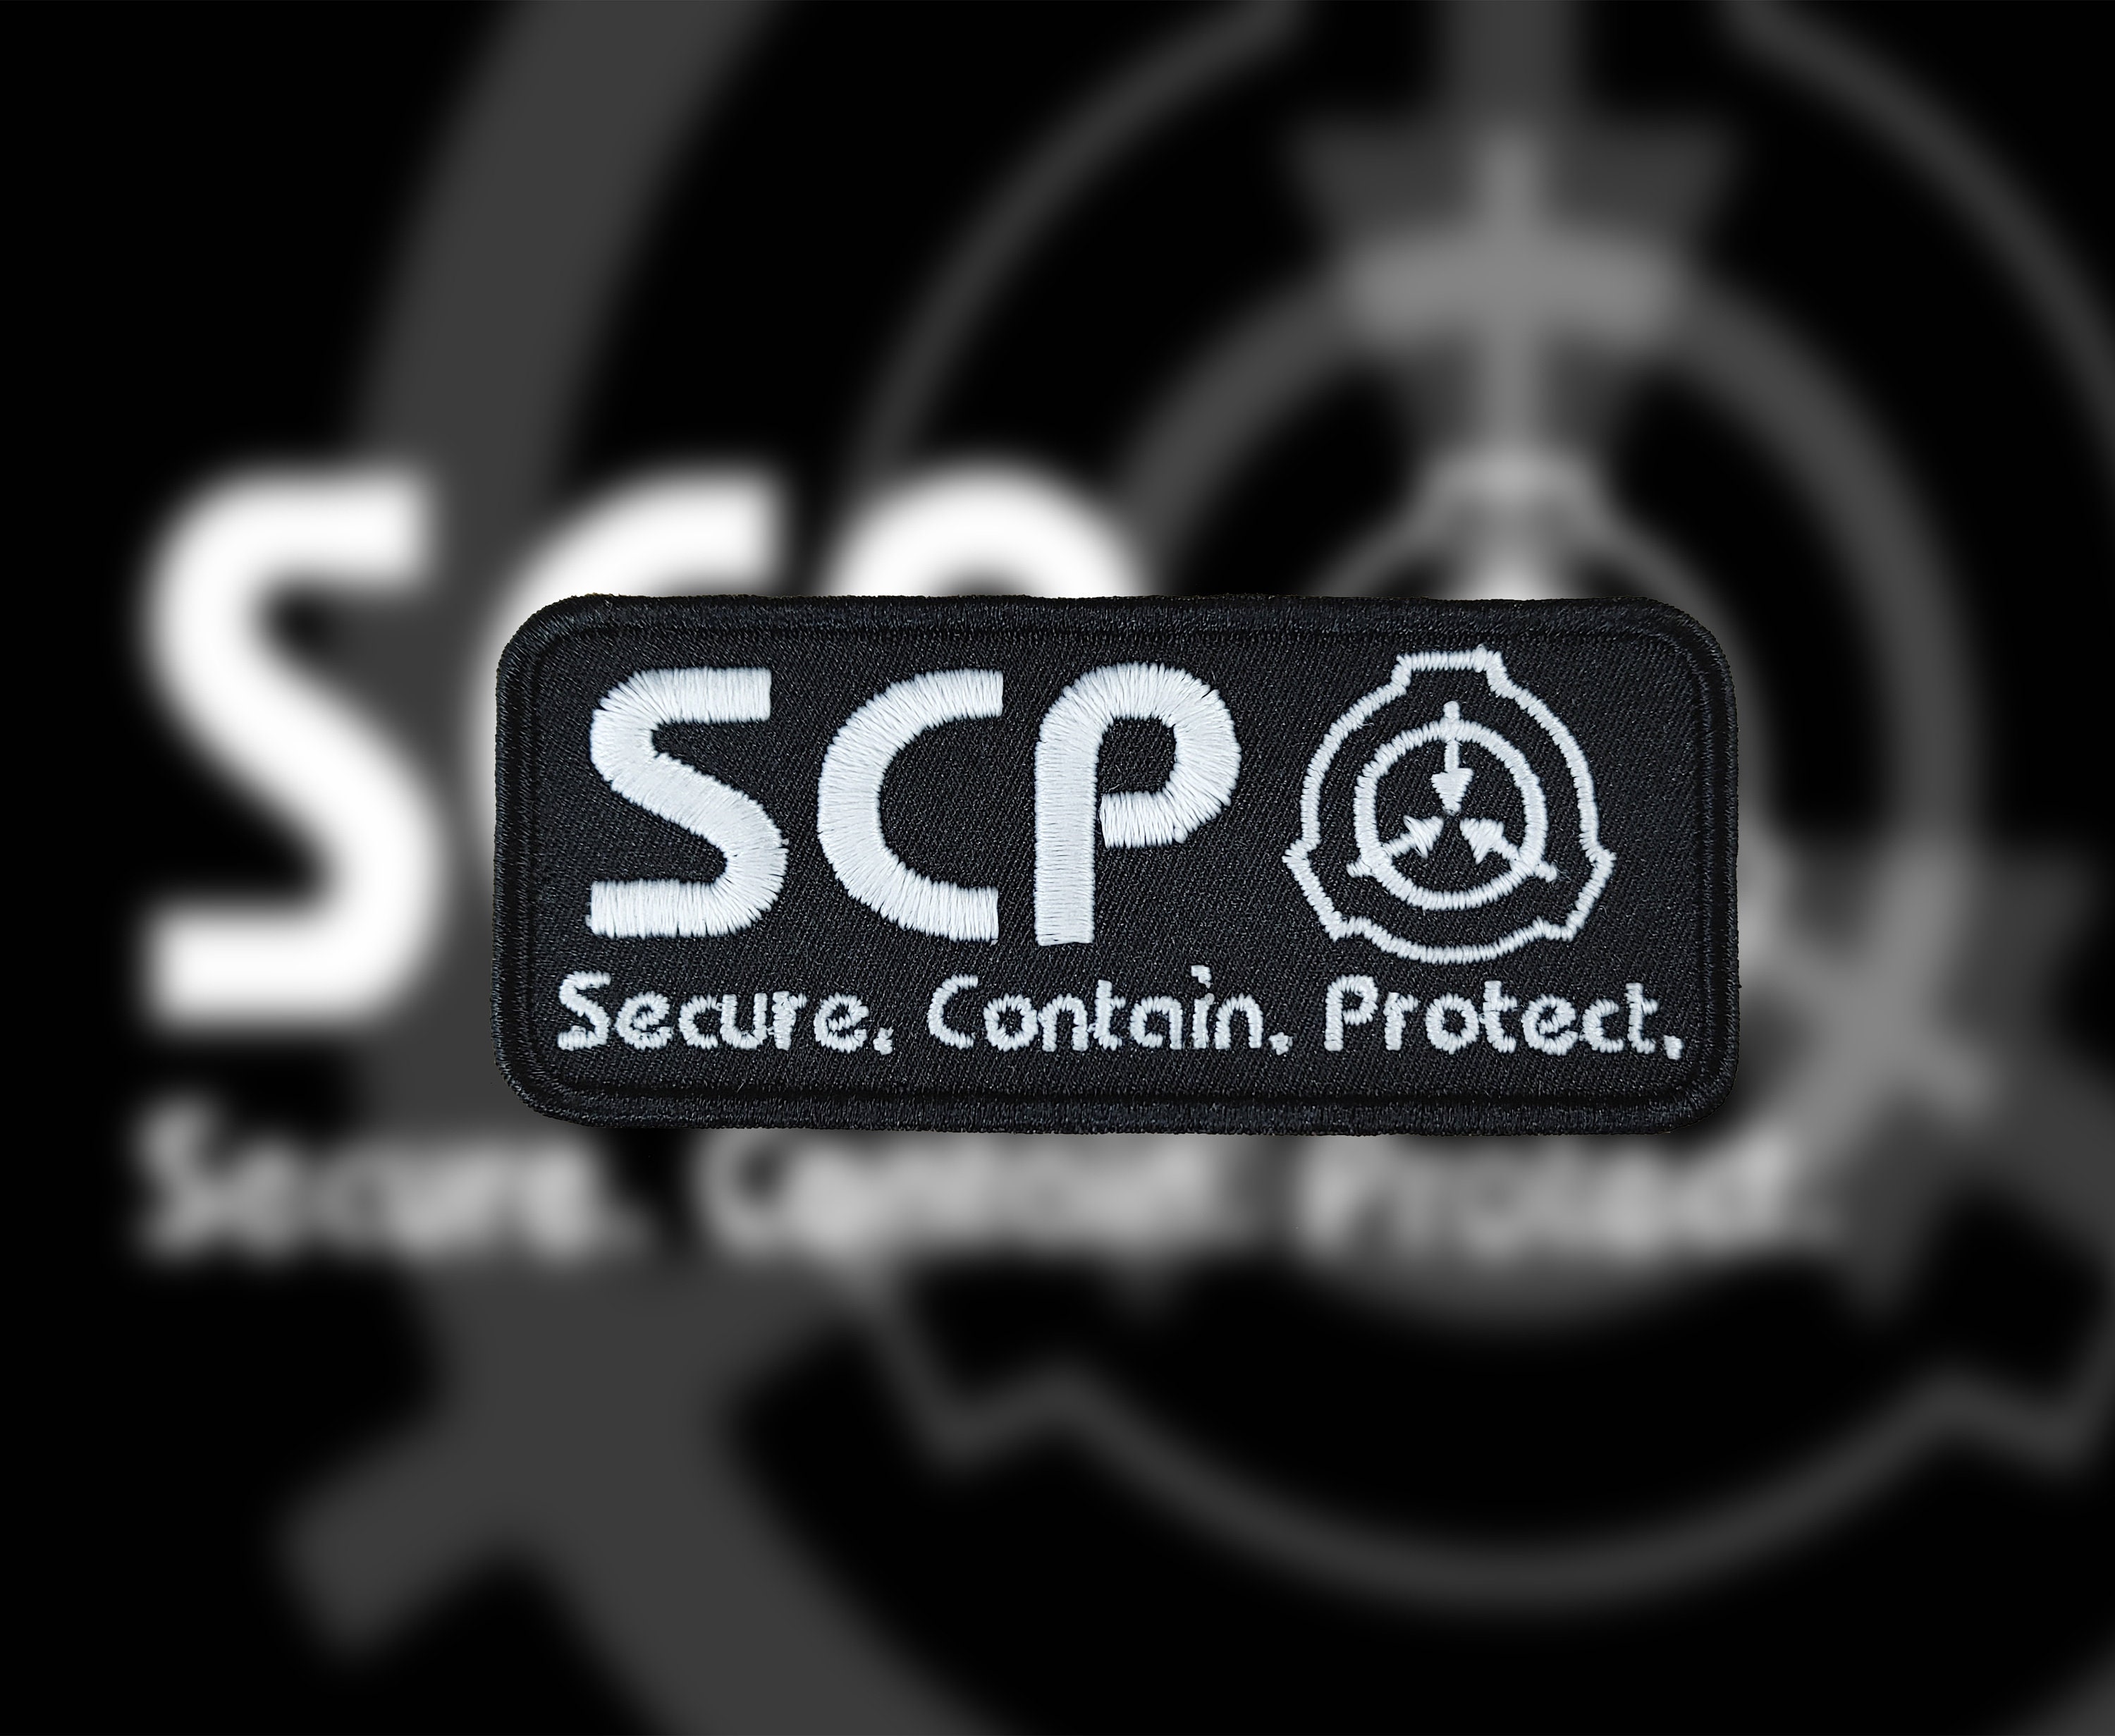 SCP-1591 - SCP Foundation